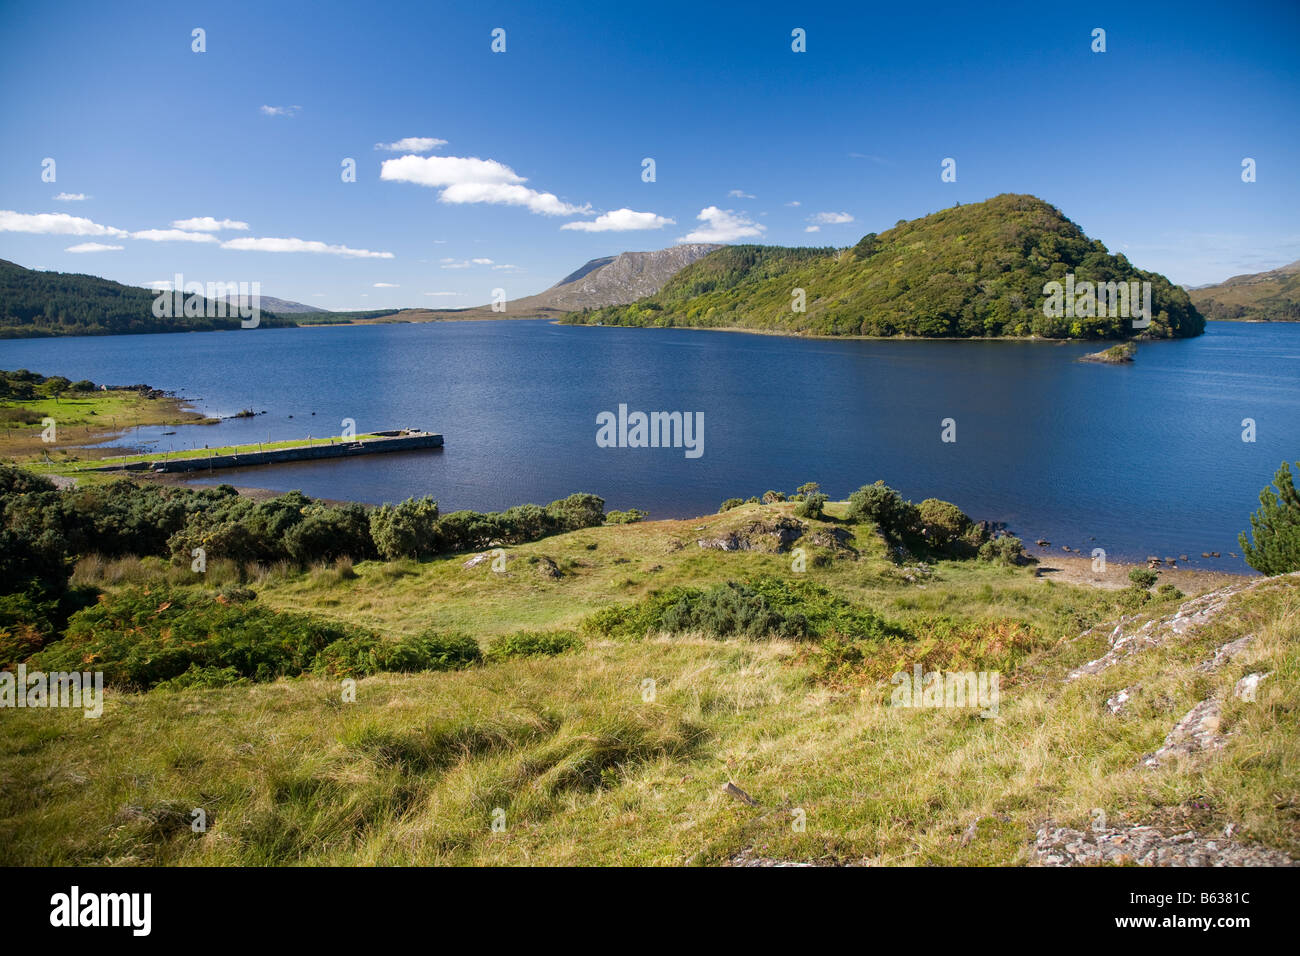 Summer view over Lough Corrib and the Drumsnauv peninsula, County Galway, Ireland. Stock Photo